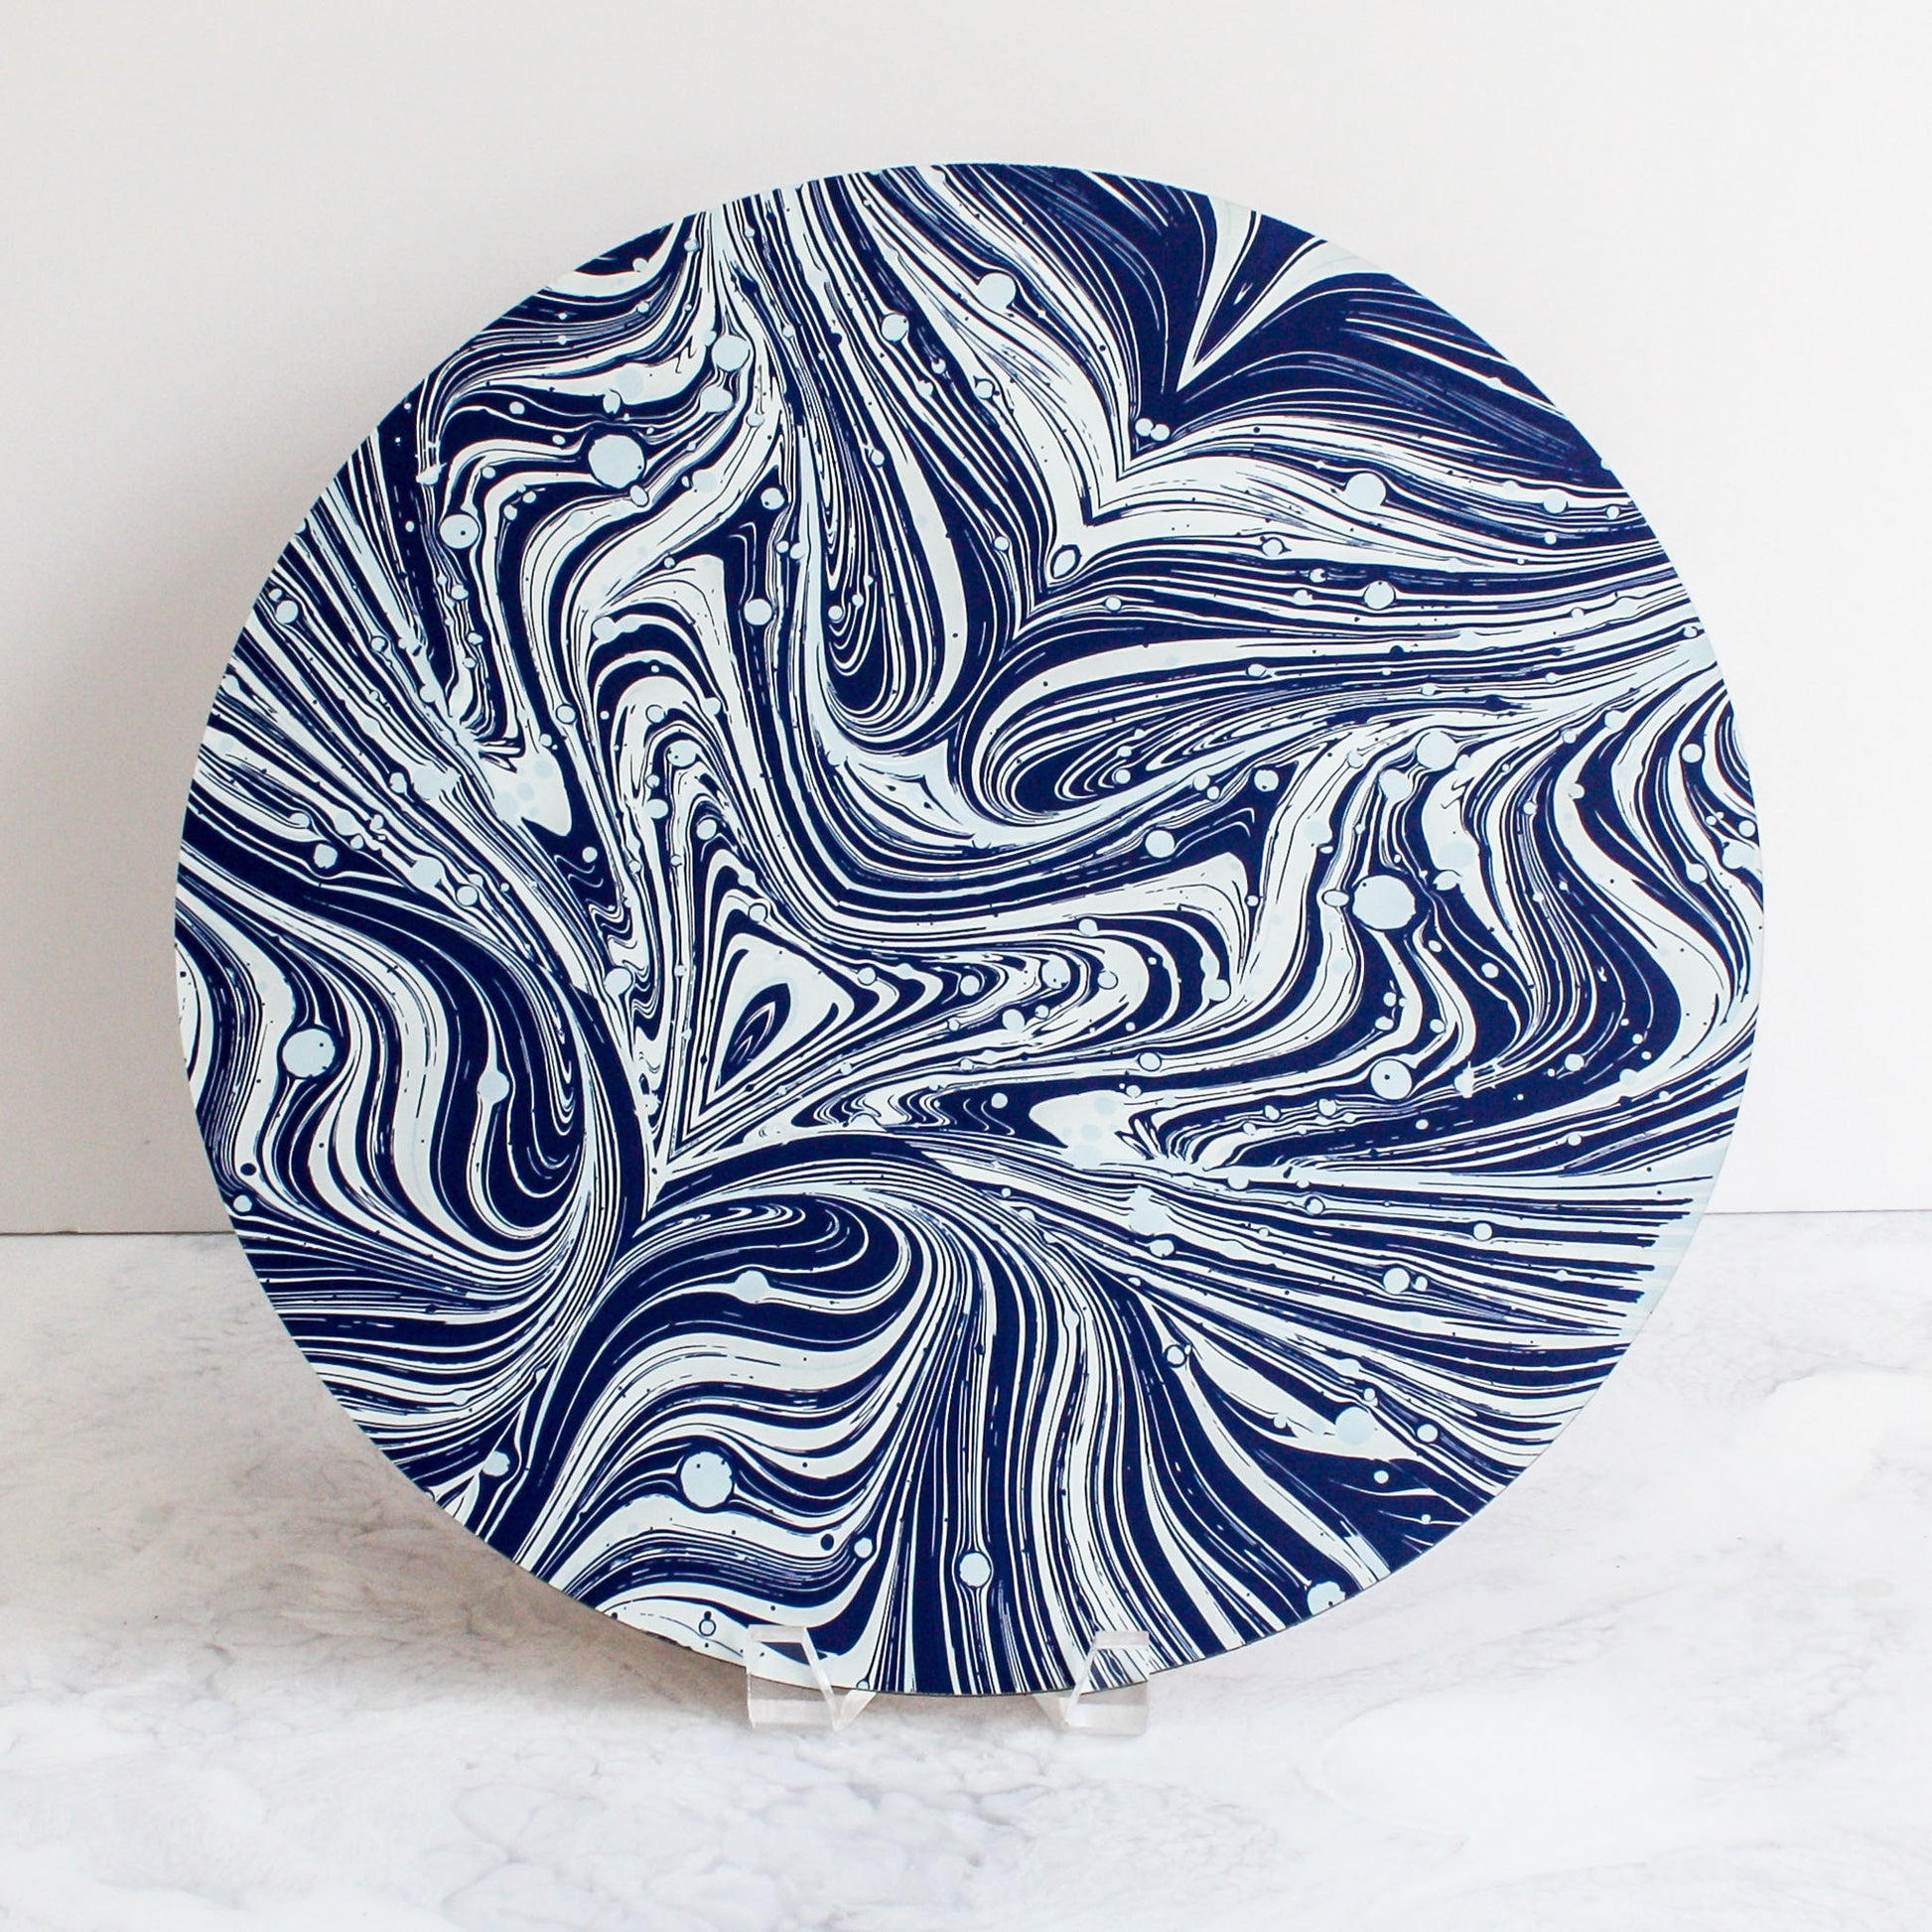 Marble placemats in navy blue